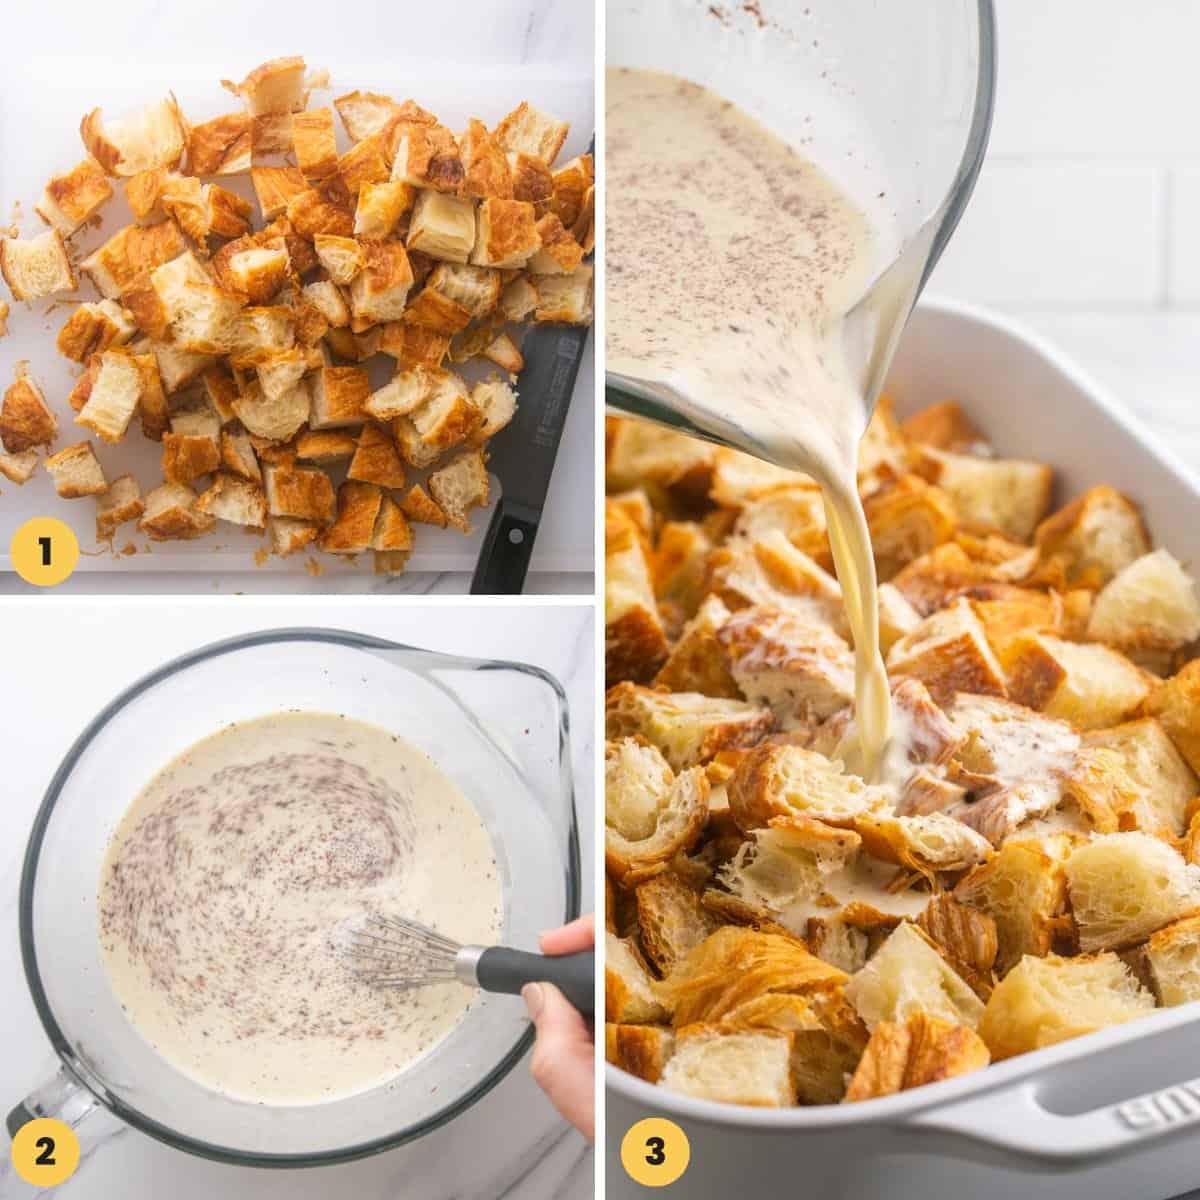 A collage of three images showing how to make bread pudding with diced croissants